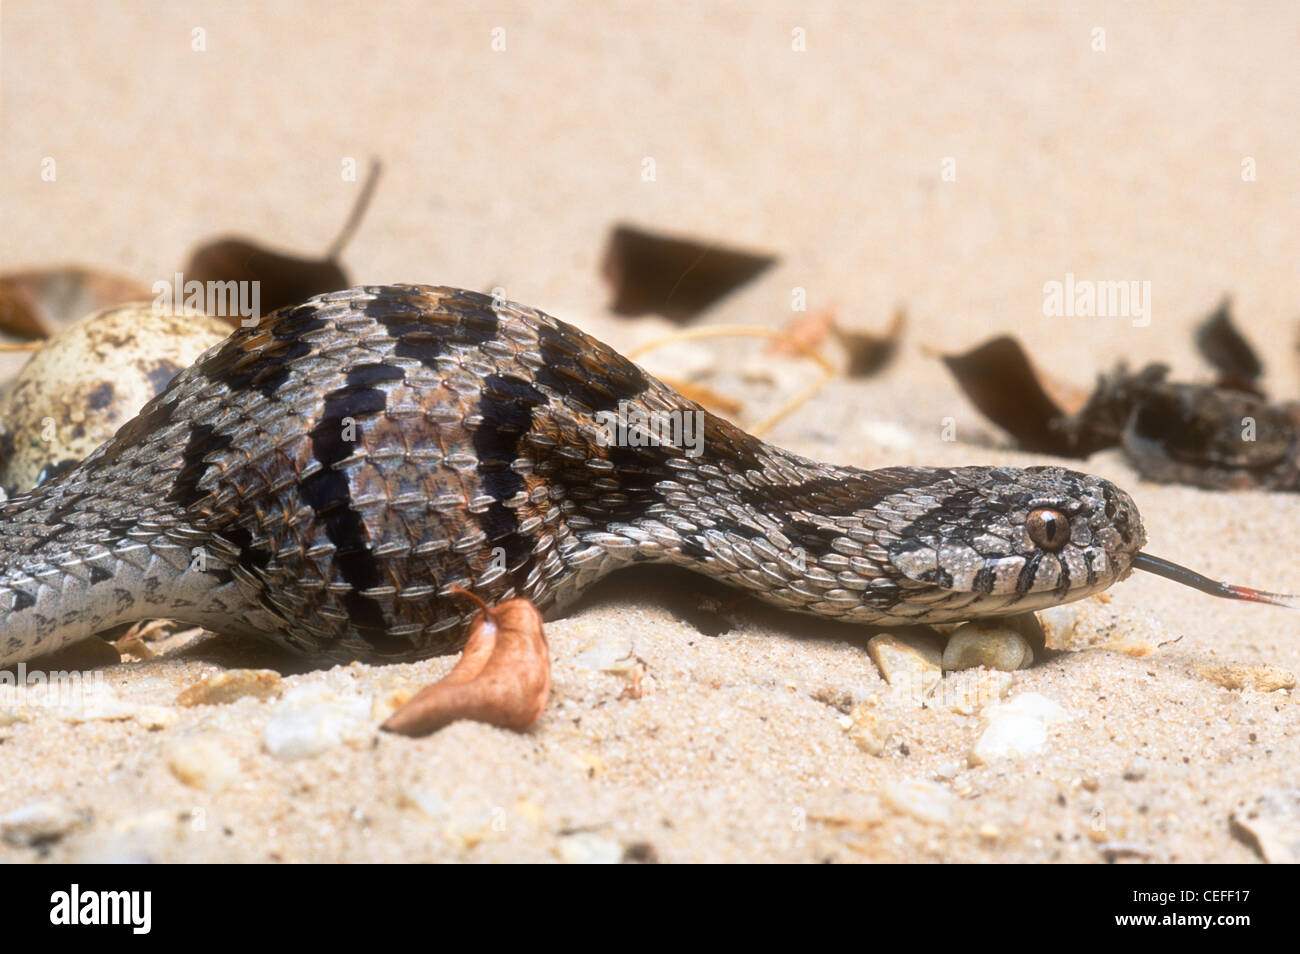 Common or rhombic egg-eating snake, Dasypeltis scabra, swallowing an egg, South Africa Stock Photo